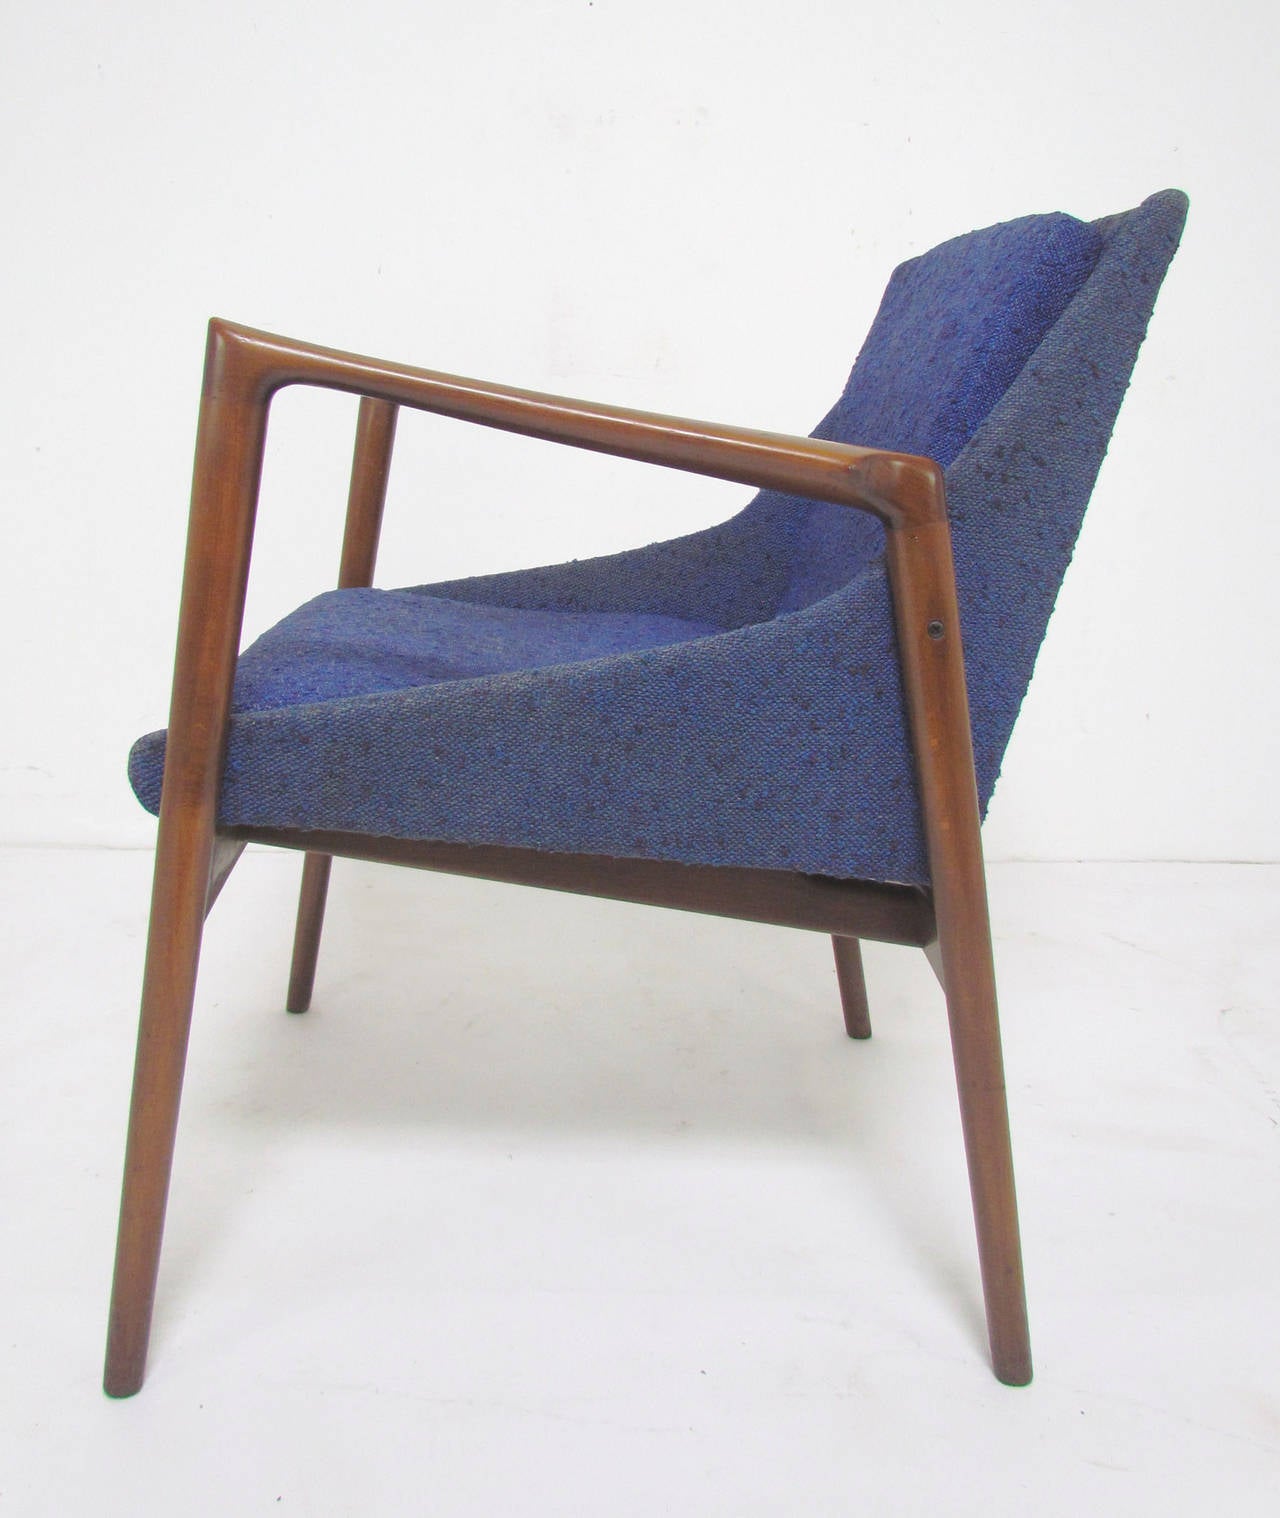 Danish lounge chair with sculptural arms designed by Ib Kofod-Larsen for Selig, circa 1960s.